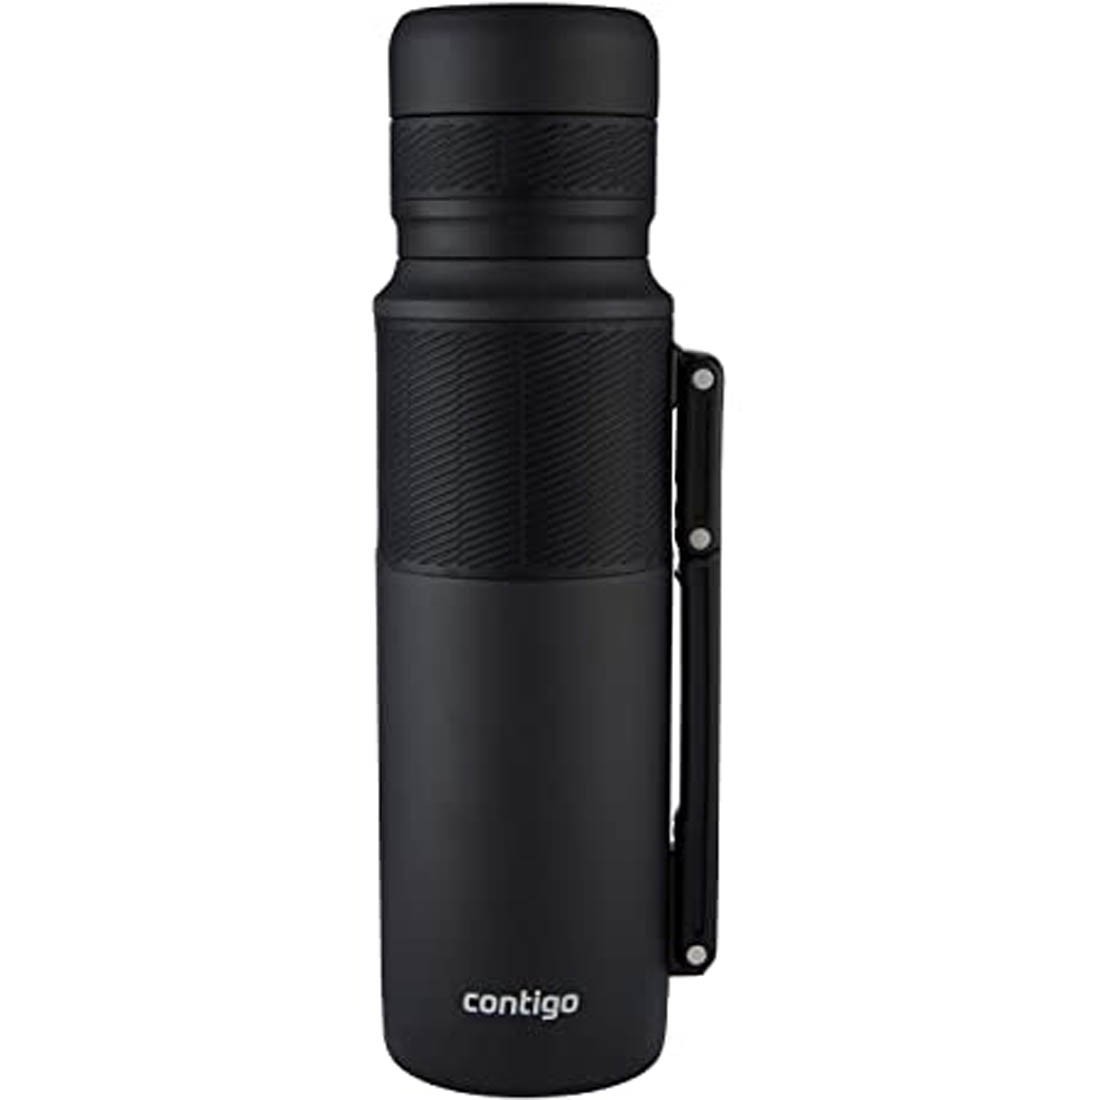 Buy Contigo Thermal Bottles With 360 Interface Vacuum Insulated Stainless  Steel 1200 ML Matte Black - Contigo, delivered to your